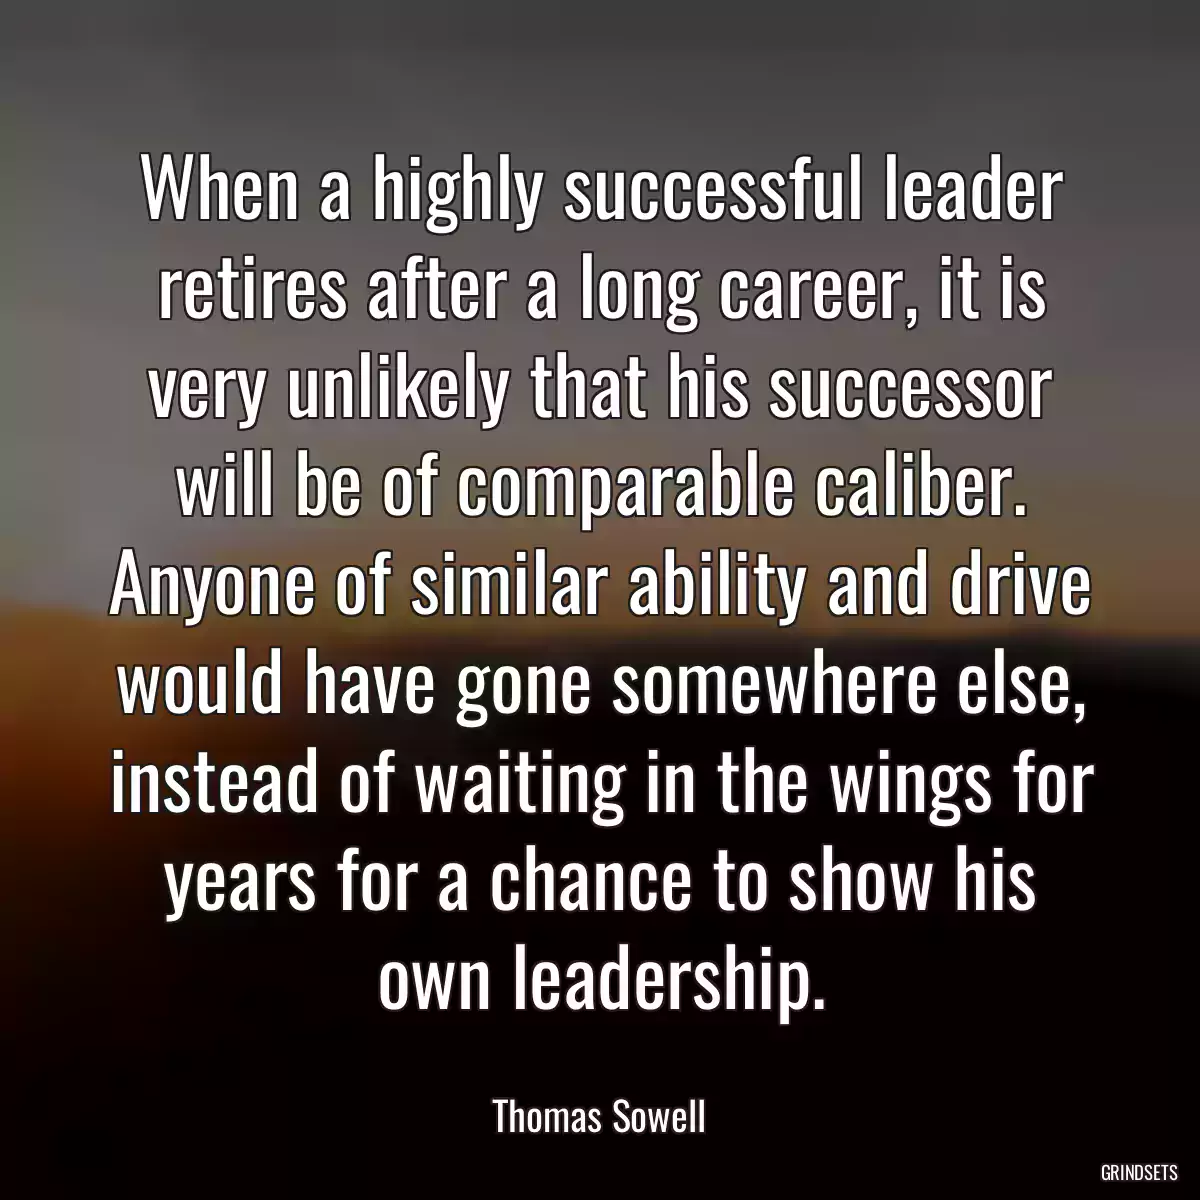 When a highly successful leader retires after a long career, it is very unlikely that his successor will be of comparable caliber. Anyone of similar ability and drive would have gone somewhere else, instead of waiting in the wings for years for a chance to show his own leadership.